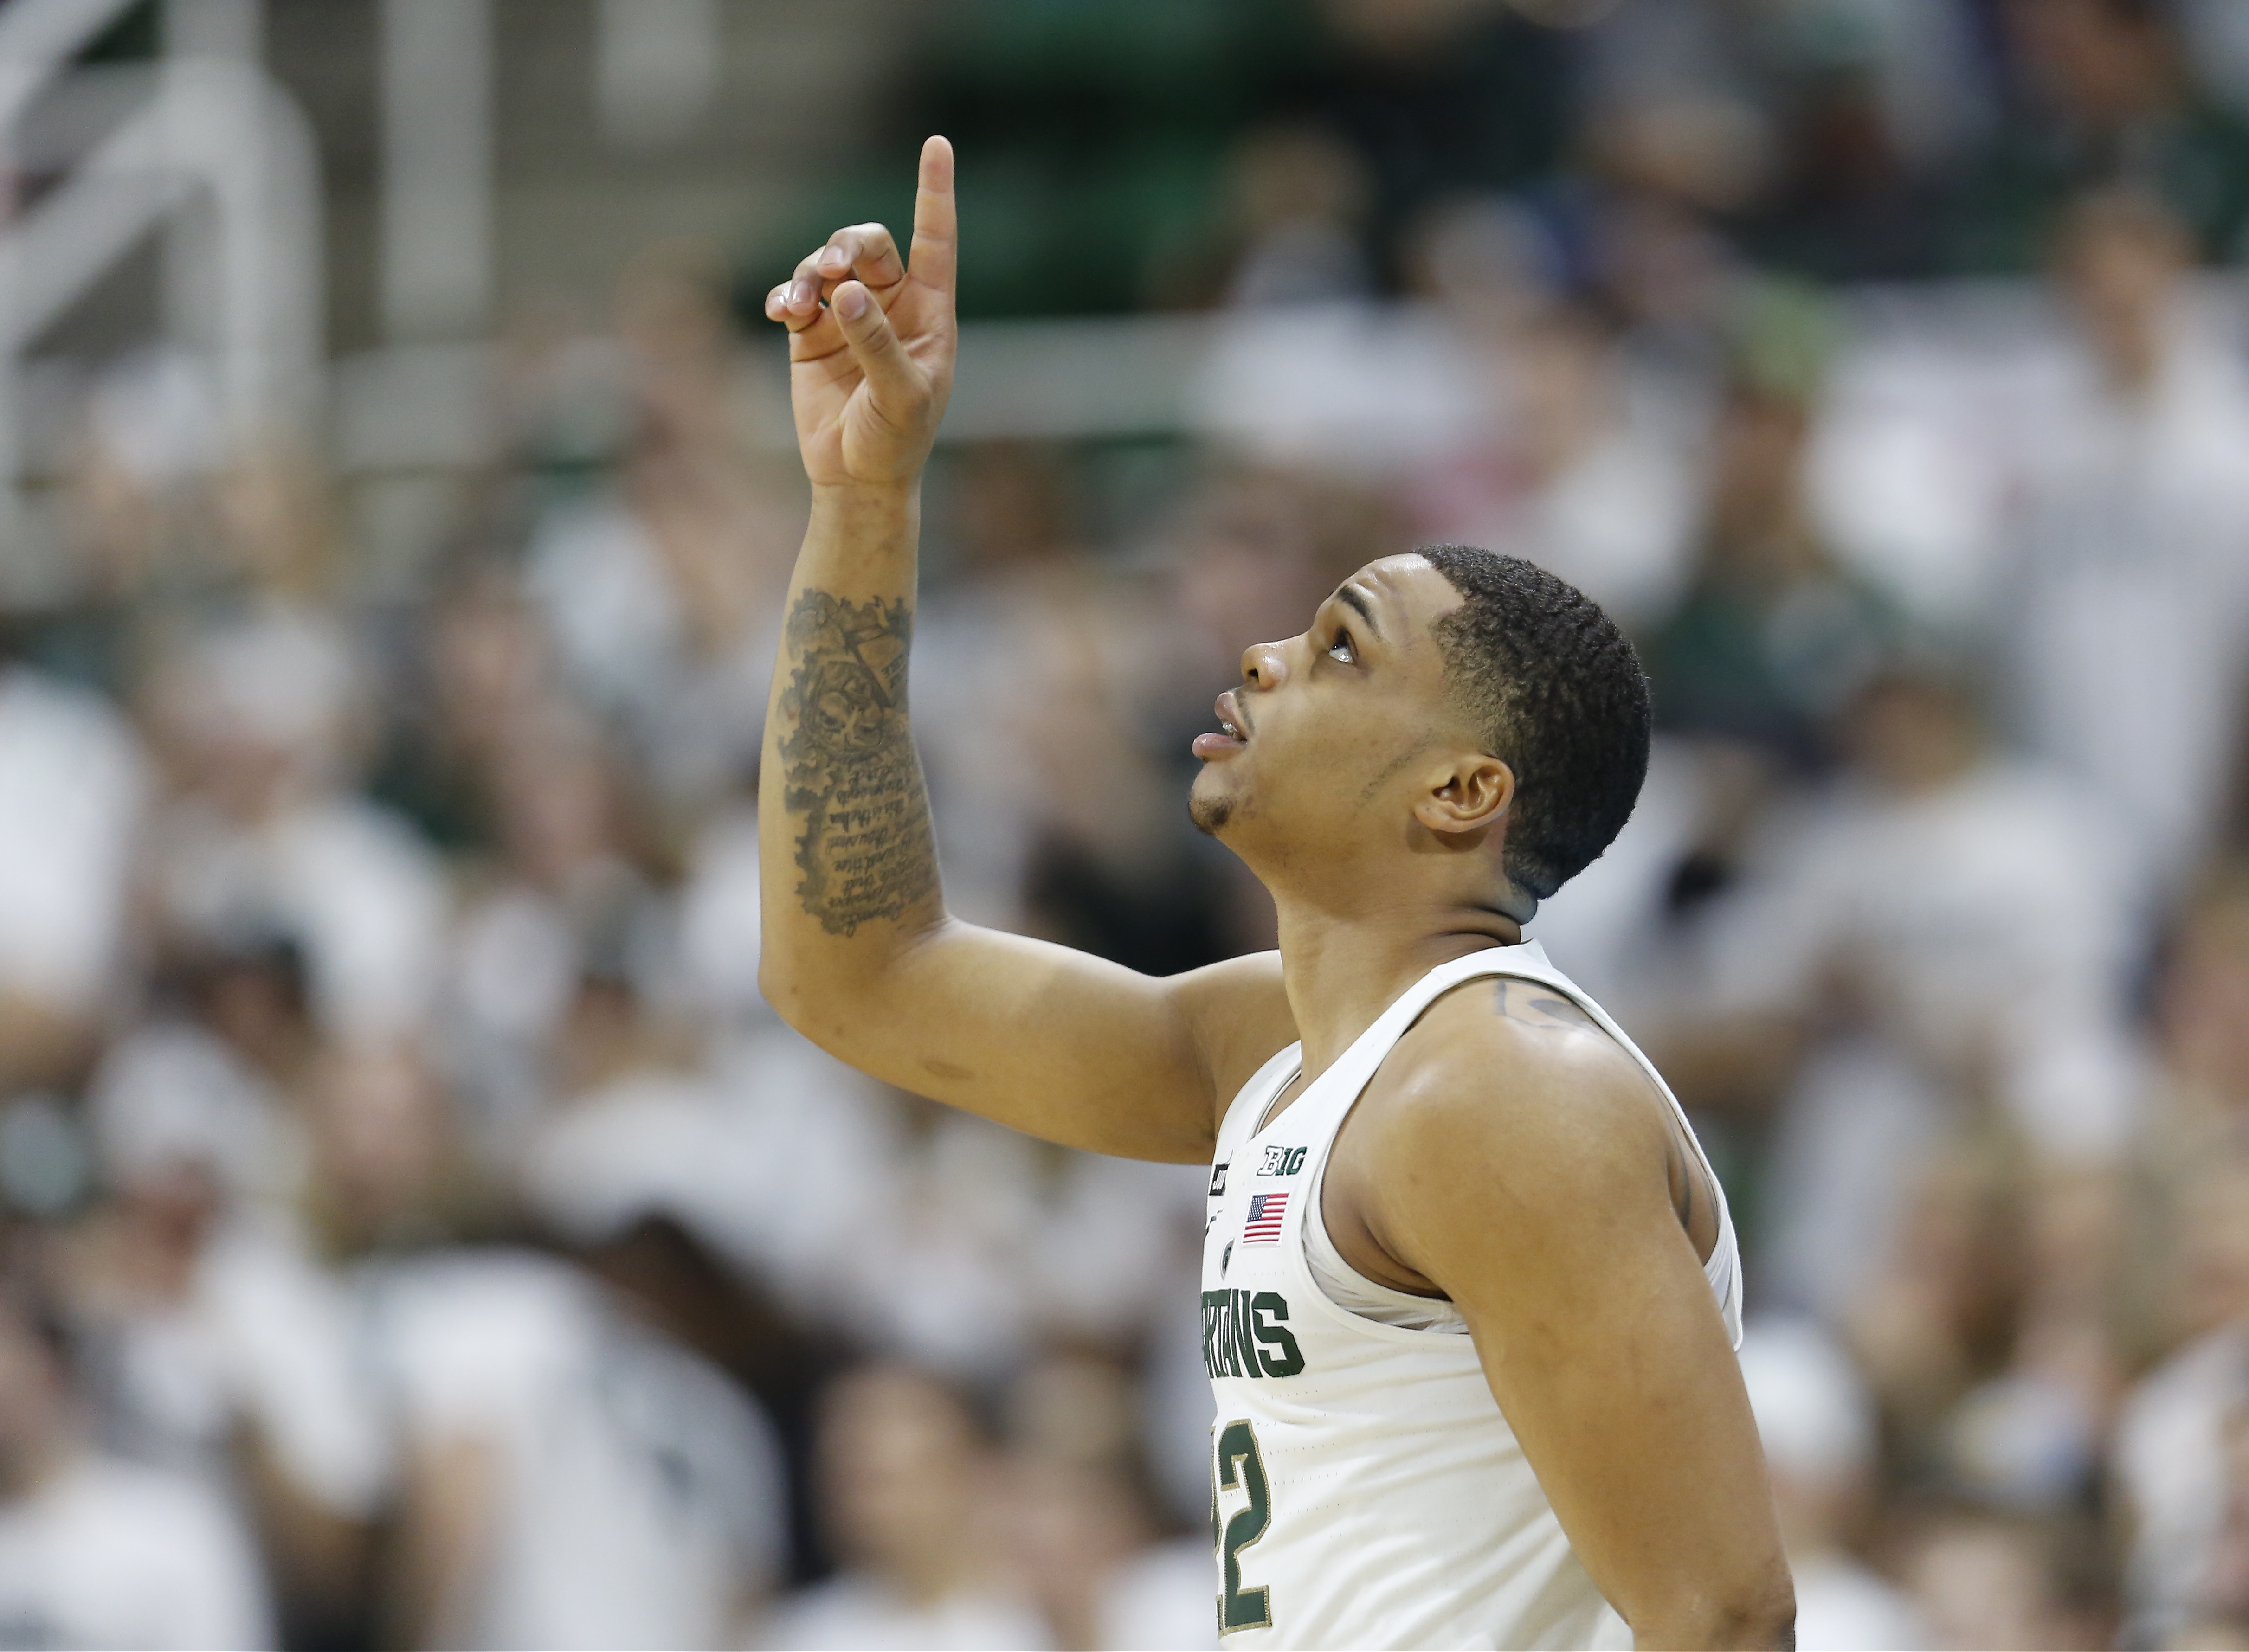 Miles Bridges' mom winds up on FBI document, another ding to MSU's rep